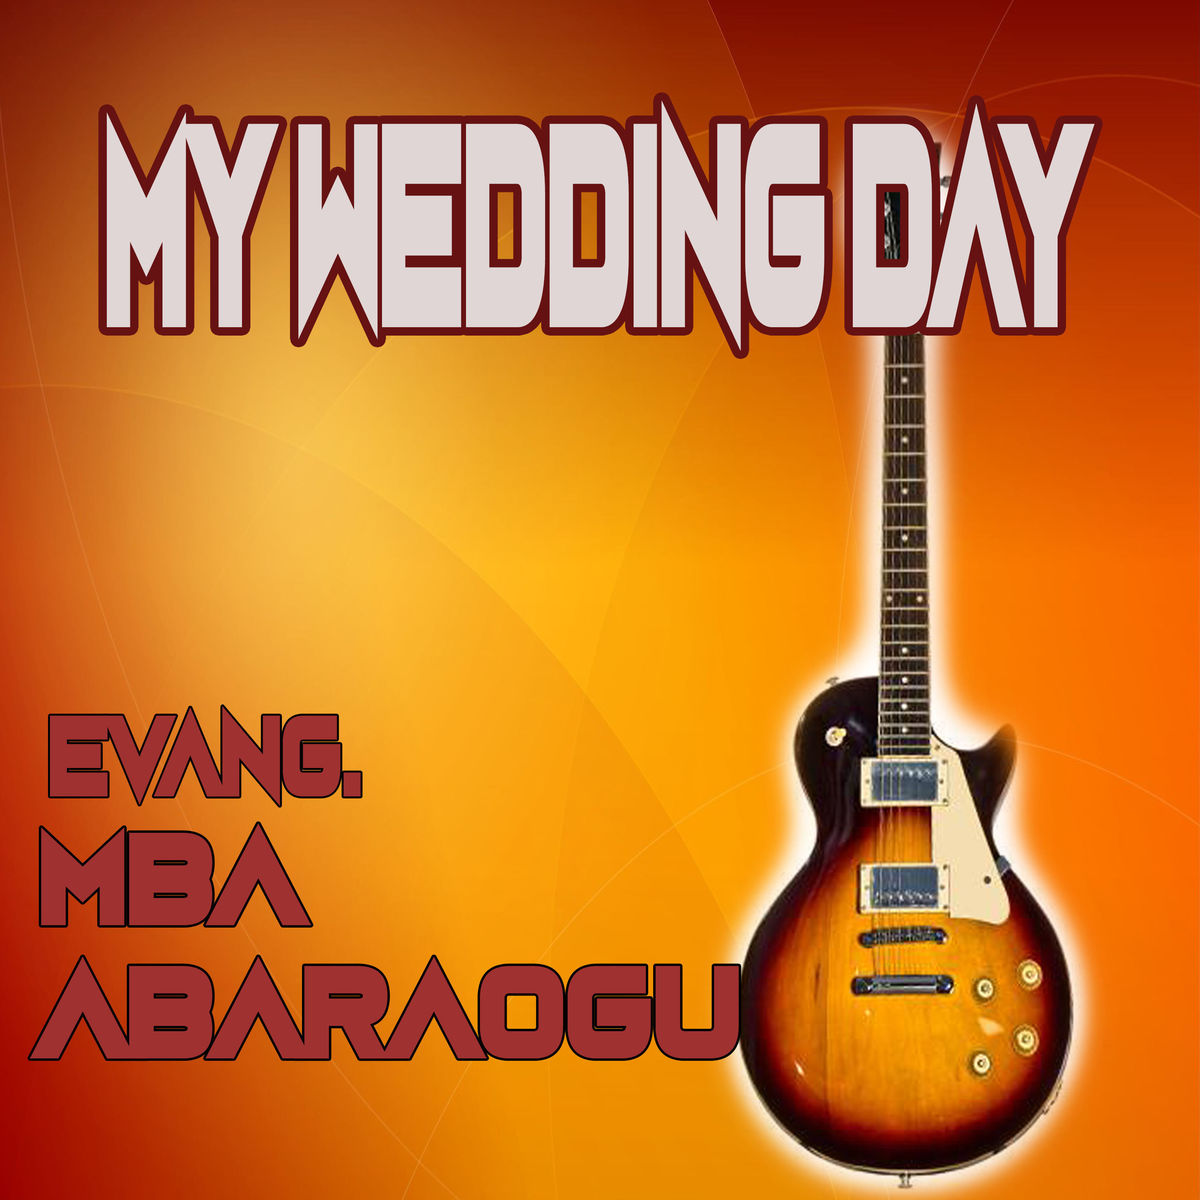 Evang. Mba Abaraogu – When This Wedding Shall Be Over